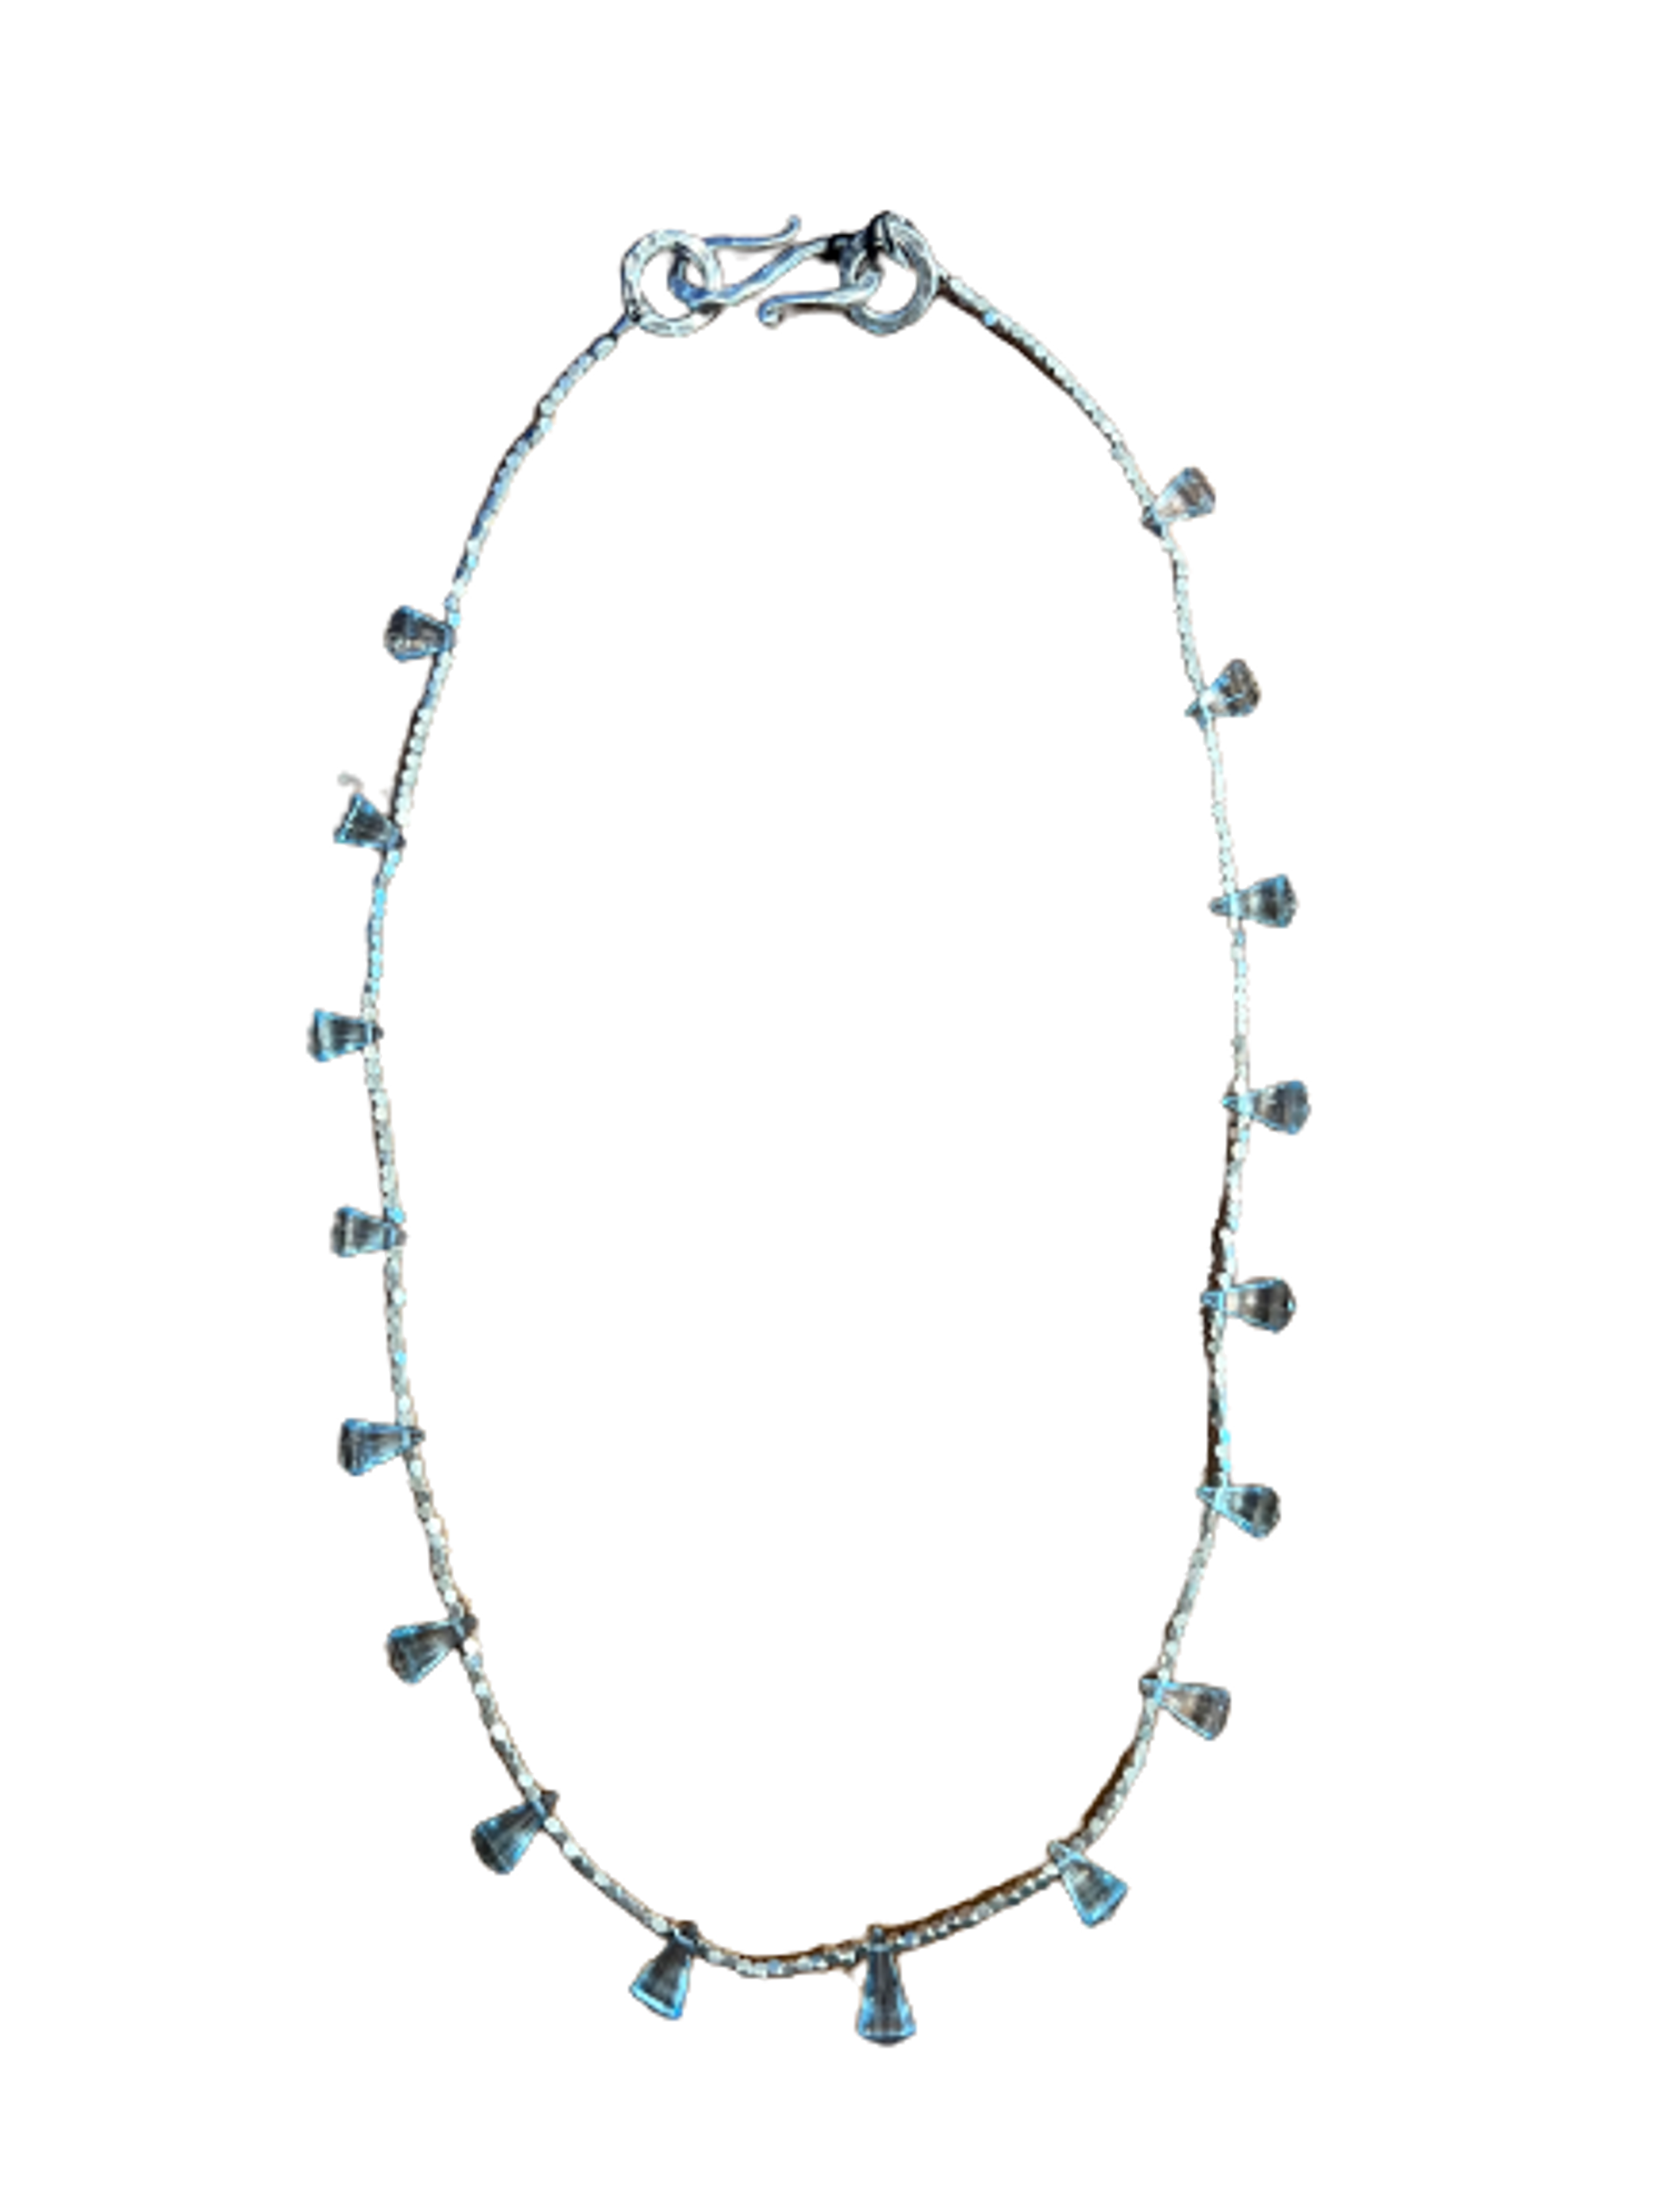 Swiss Blue Topaz Necklace - Sterling Silver by Mara Labell